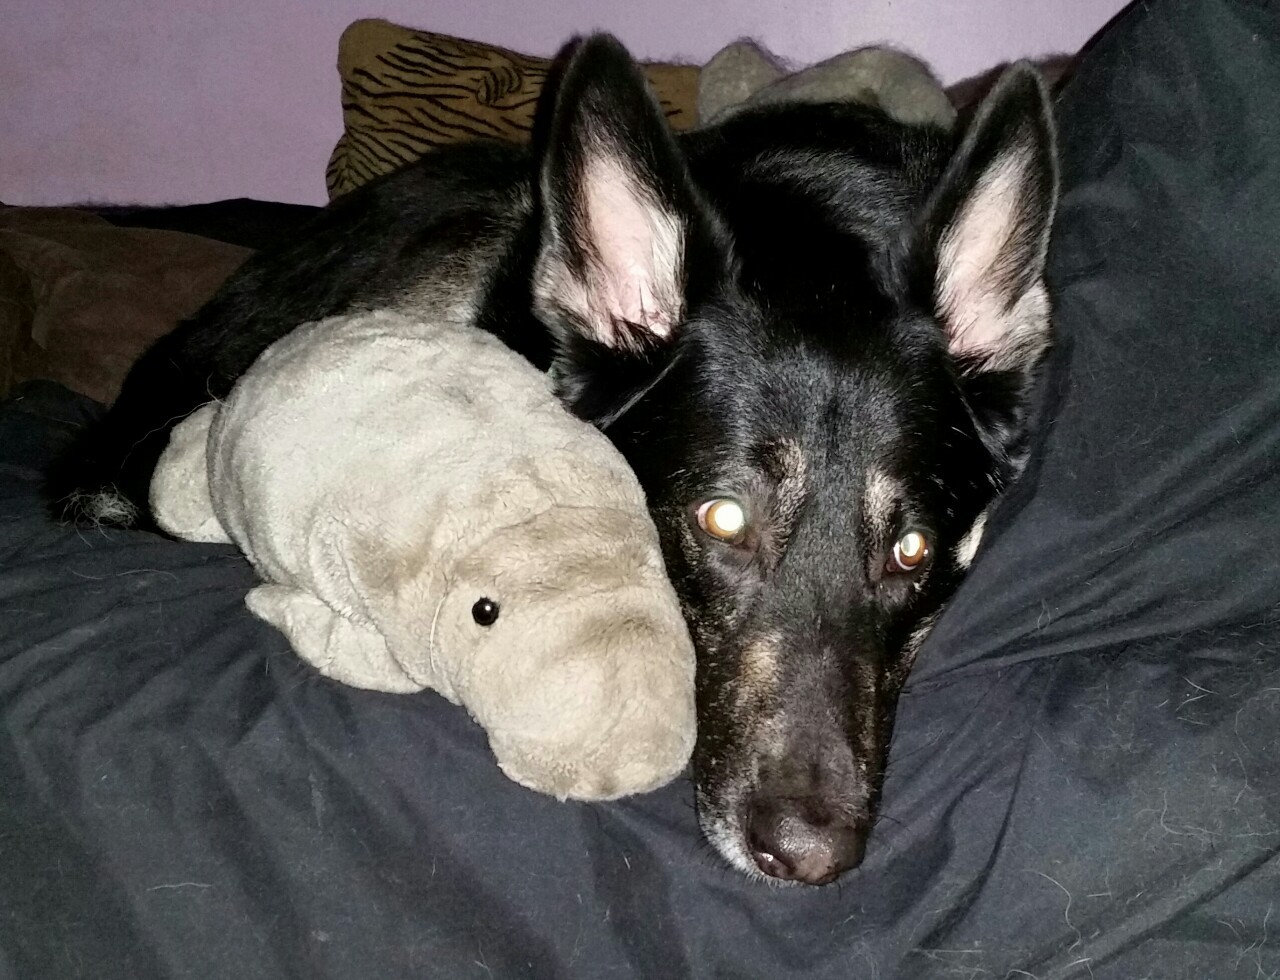 Vincent hanging out with my stuffed manatee, Hugh